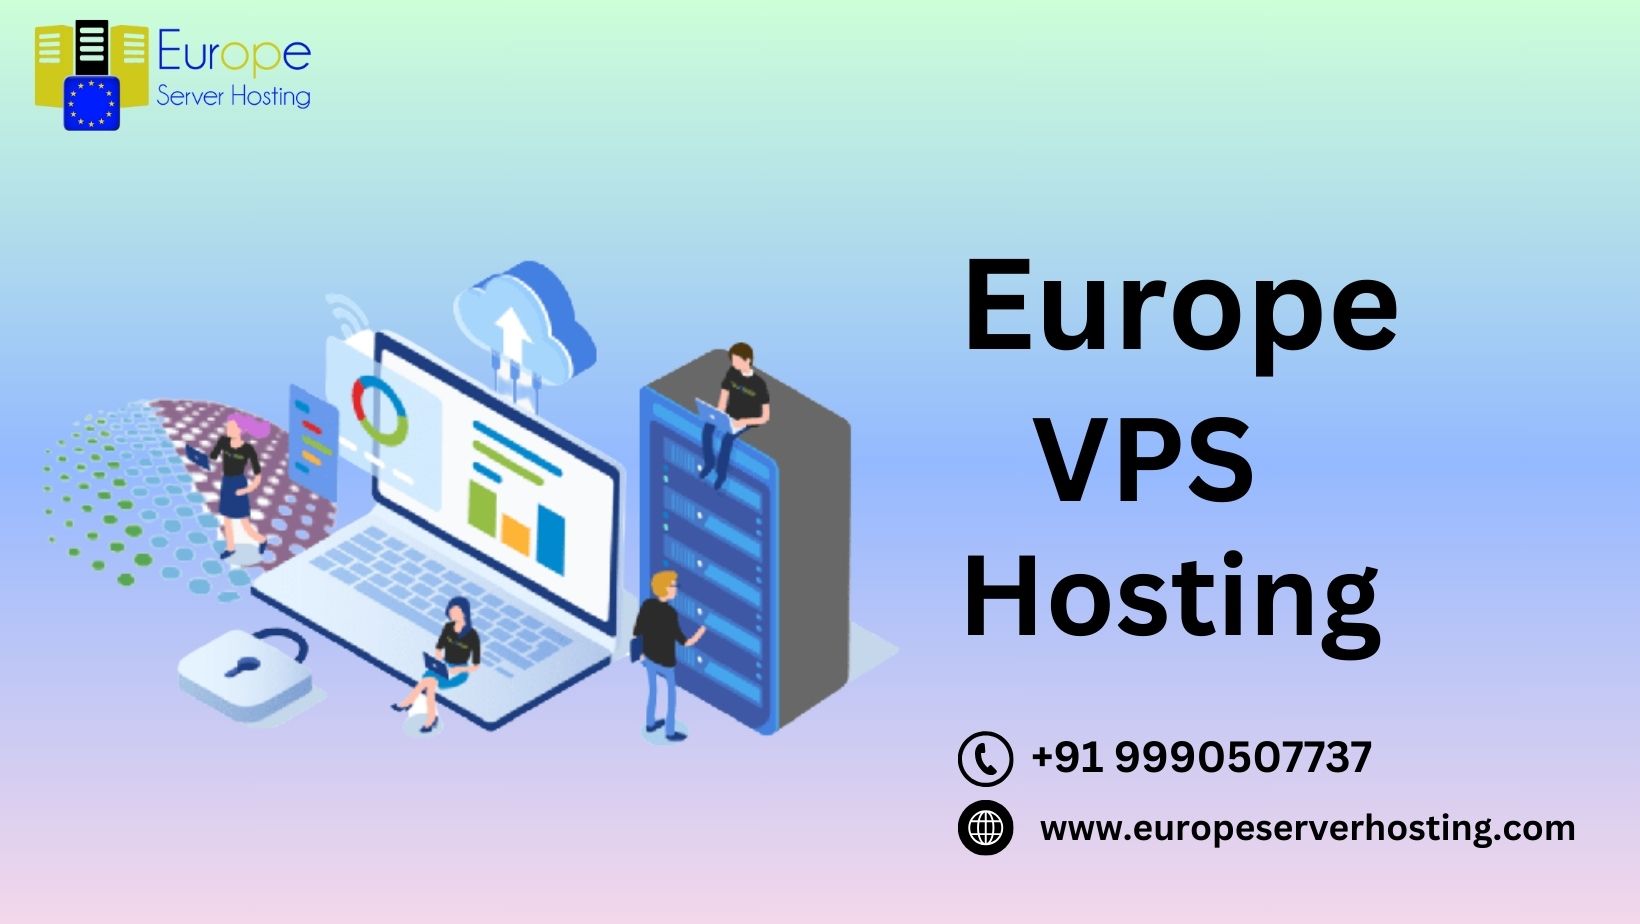 Europe VPS hosting offers a compelling set of advantages, including its geographic advantage, robust infrastructure, data privacy, scalability, and more